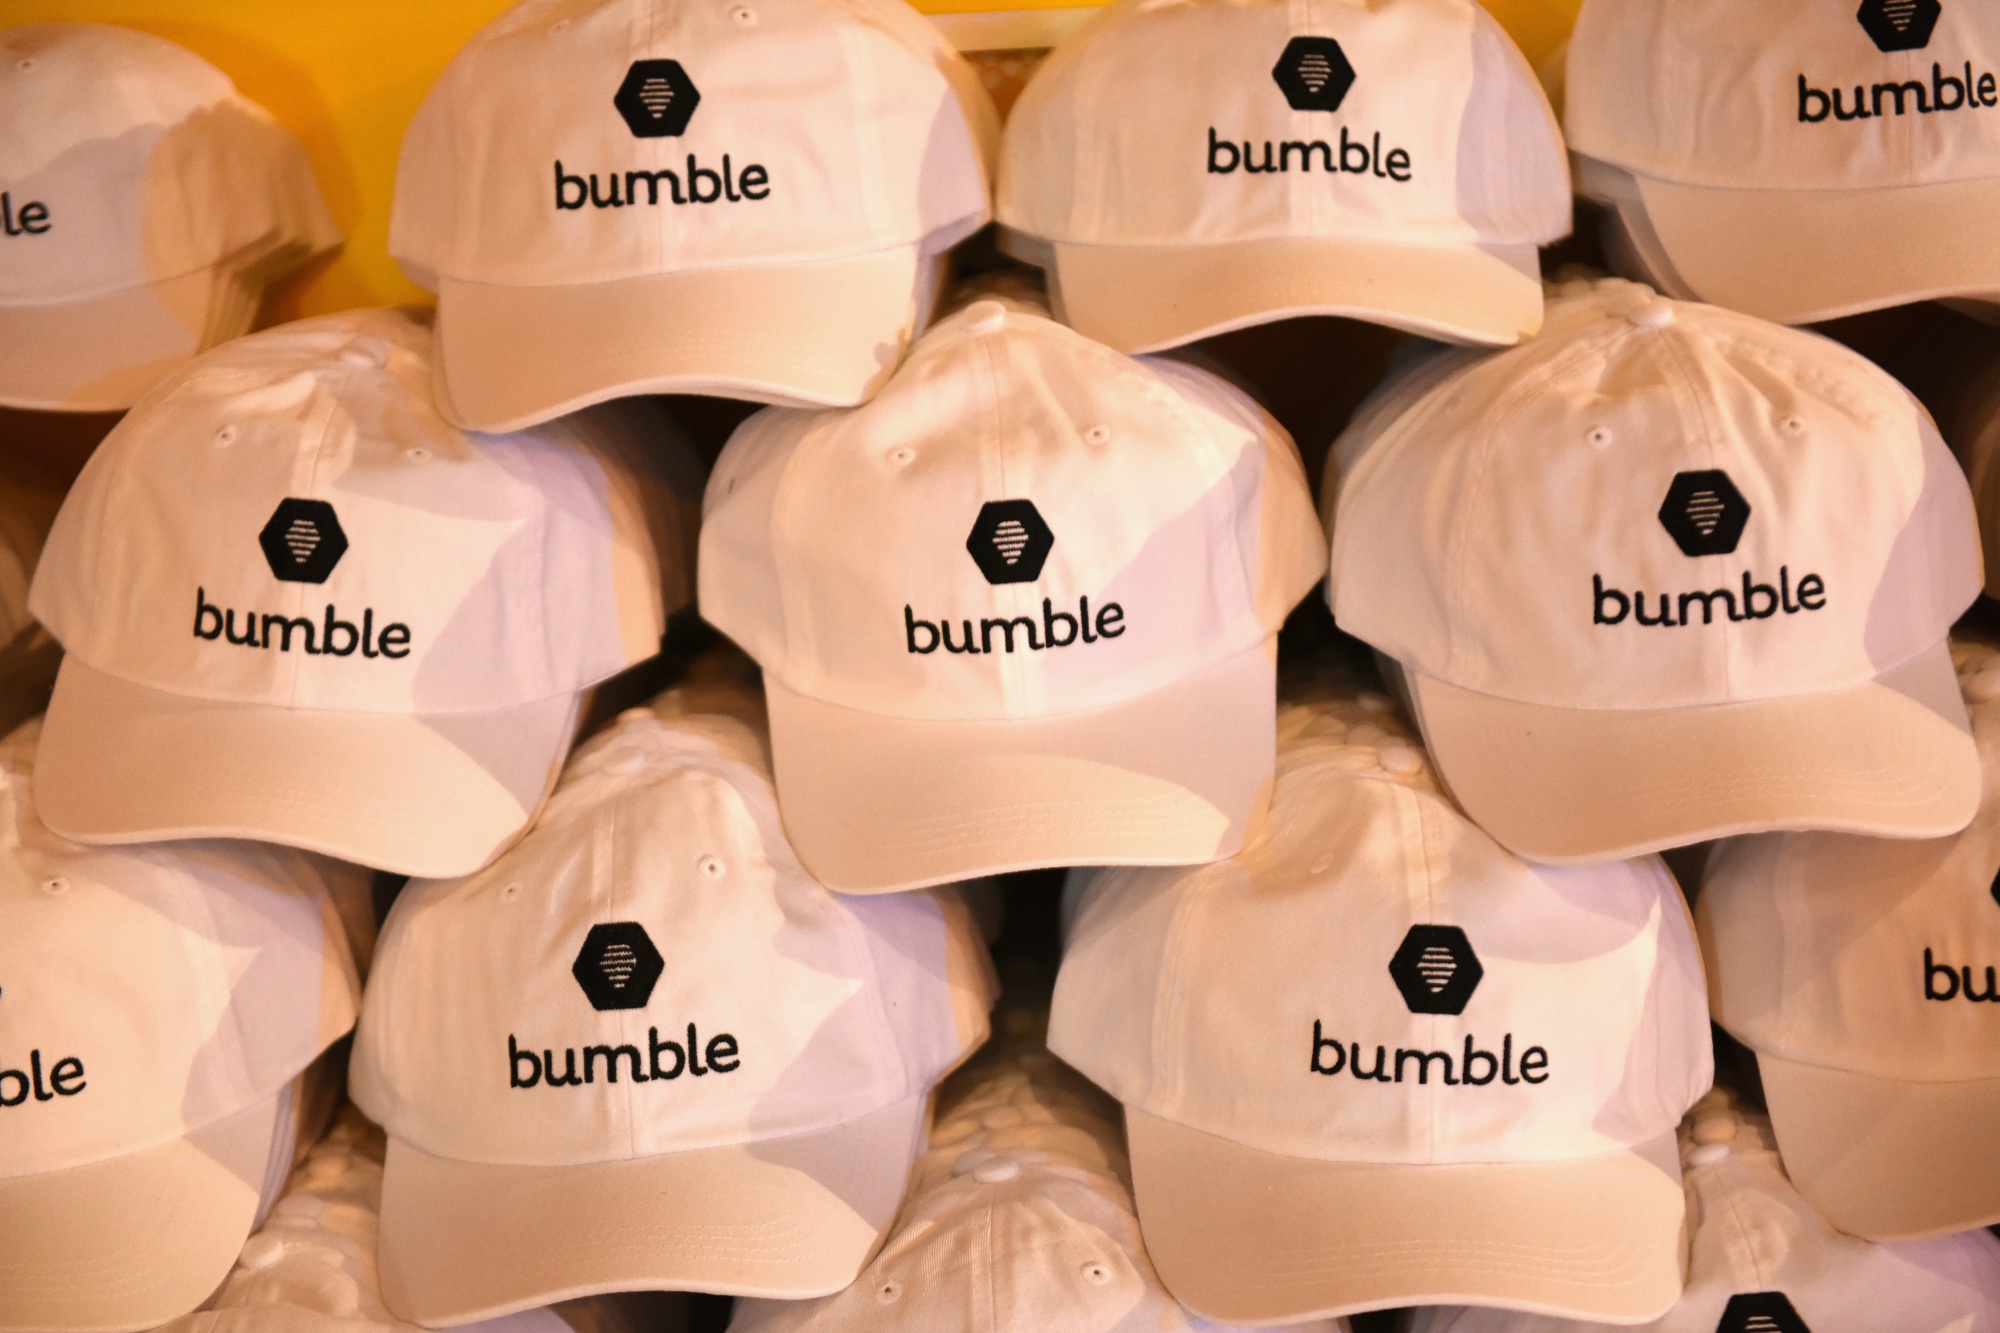 Bumble launches a separate BFF app for friend friending